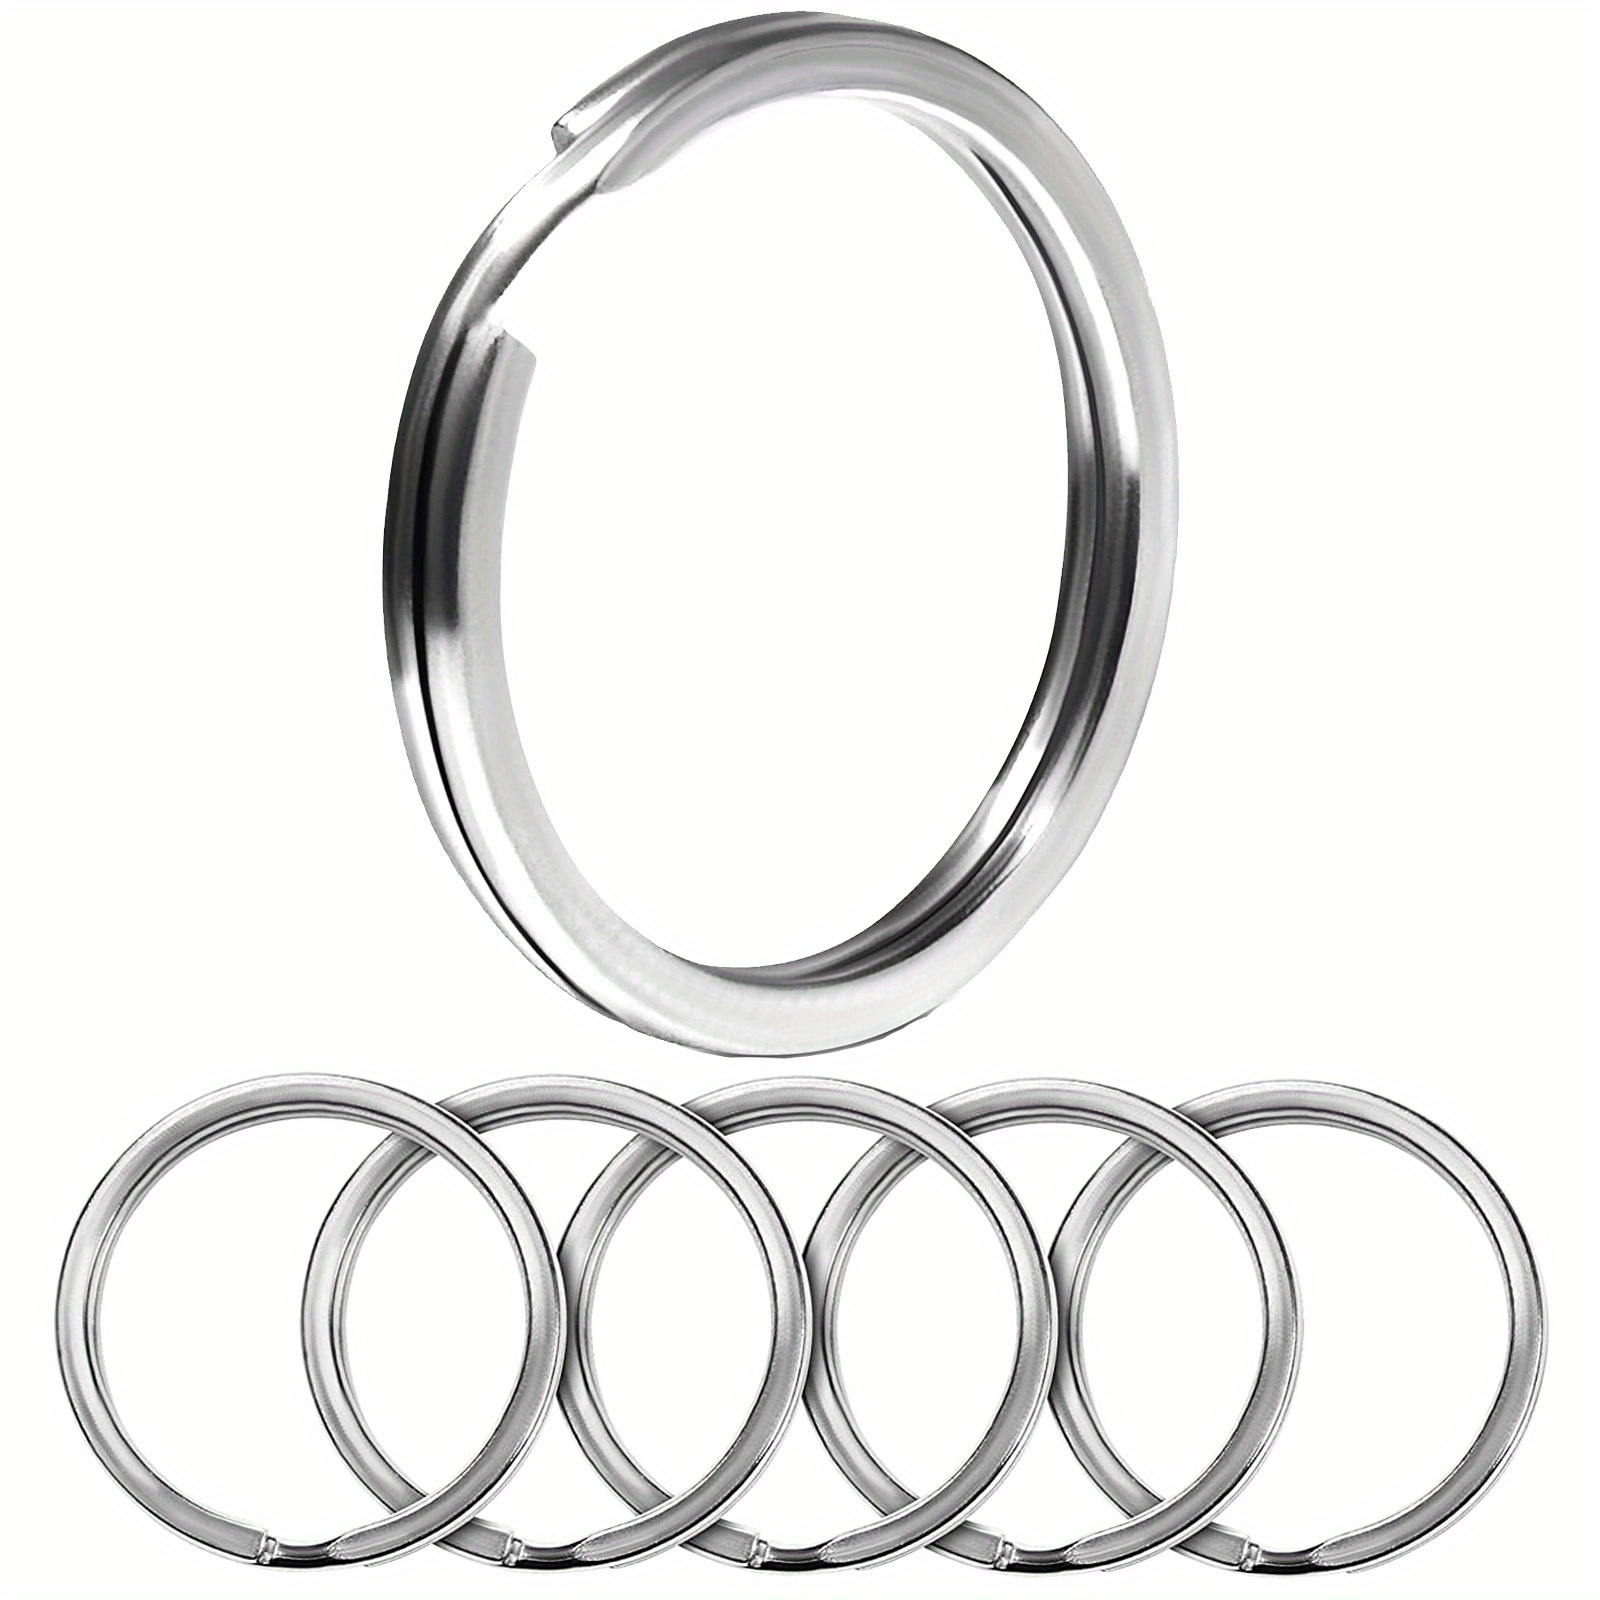 Flat Stainless Steel O-Rings